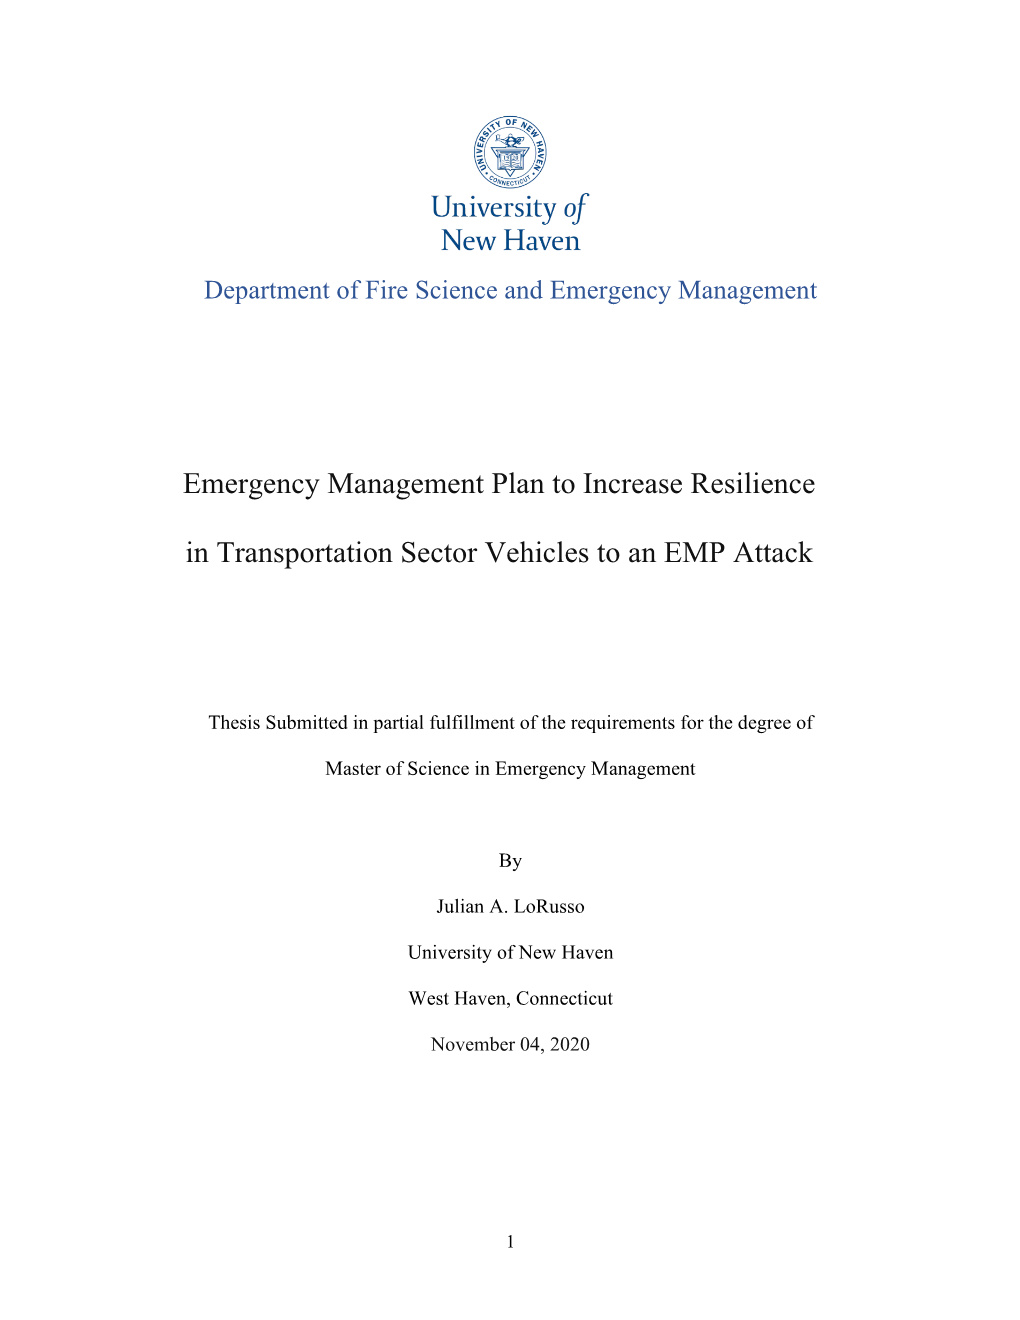 Emergency Management Plan to Increase Resilience in Transportation Sector Vehicles to an EMP Attack